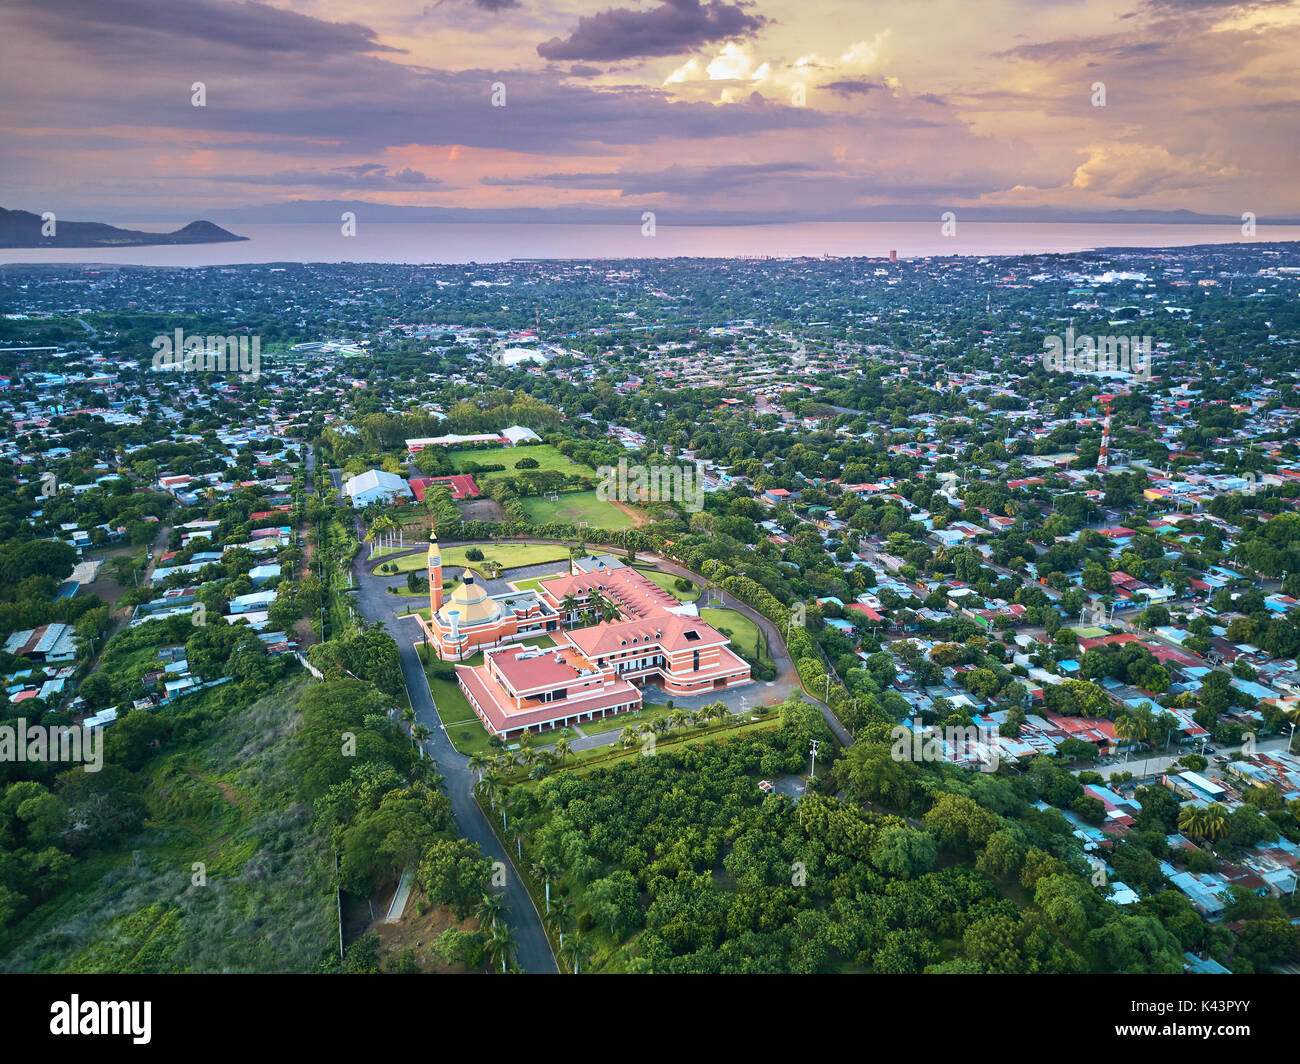 Landscape of Managua city in Nicaragua aerial view Stock Photo